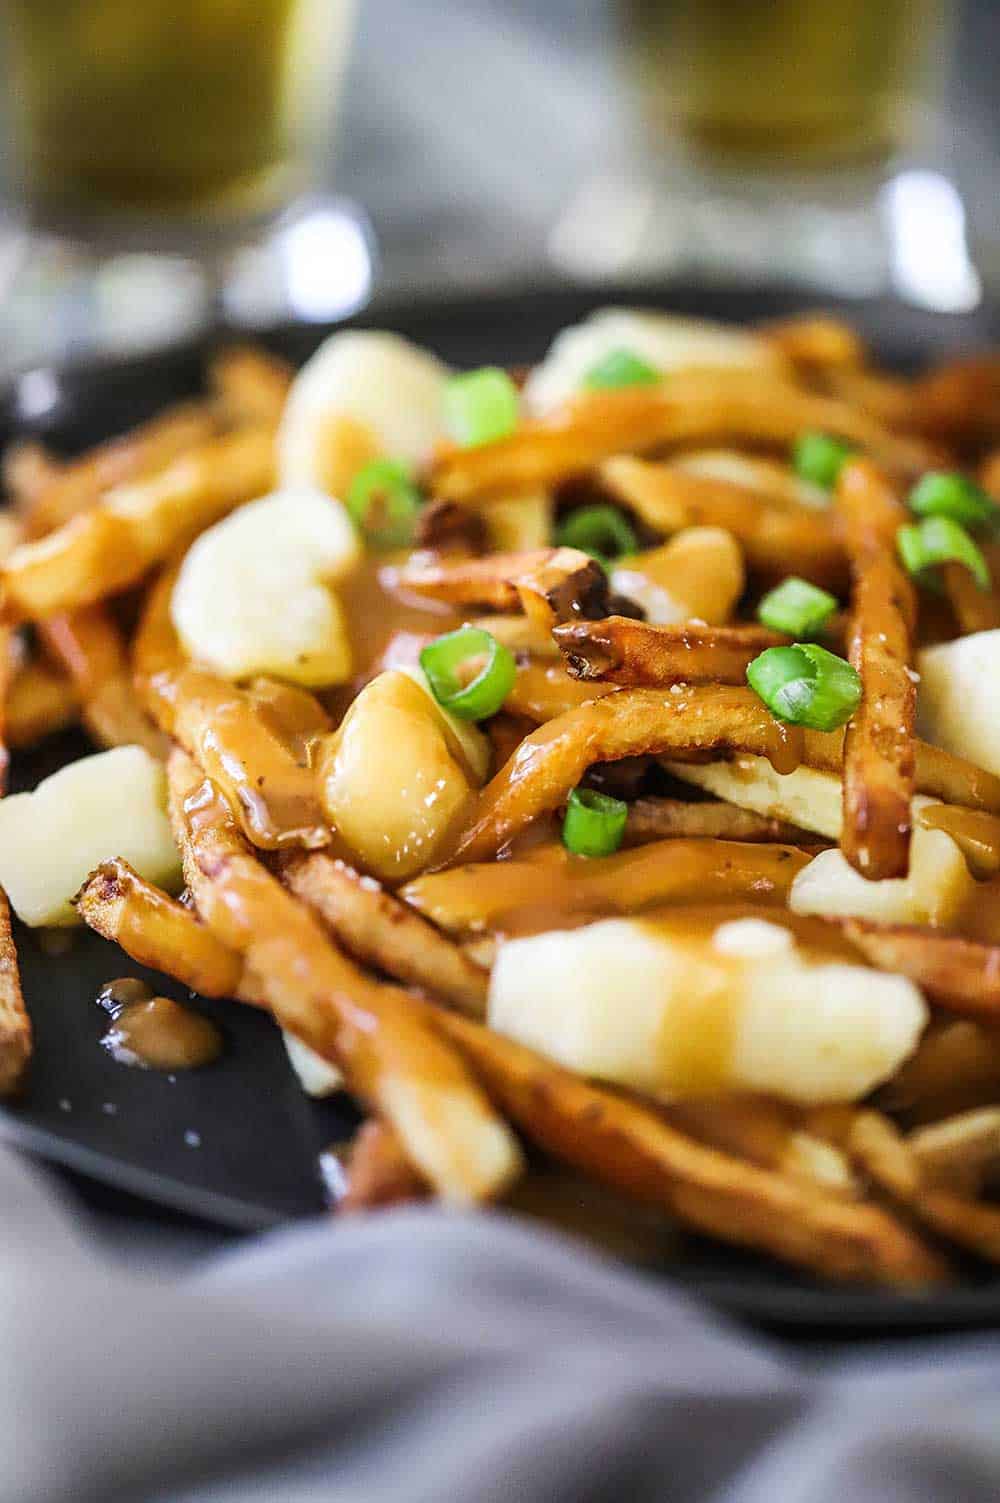 A close-up view of a black dinner plate filled with poutine and topped with chopped scallions.